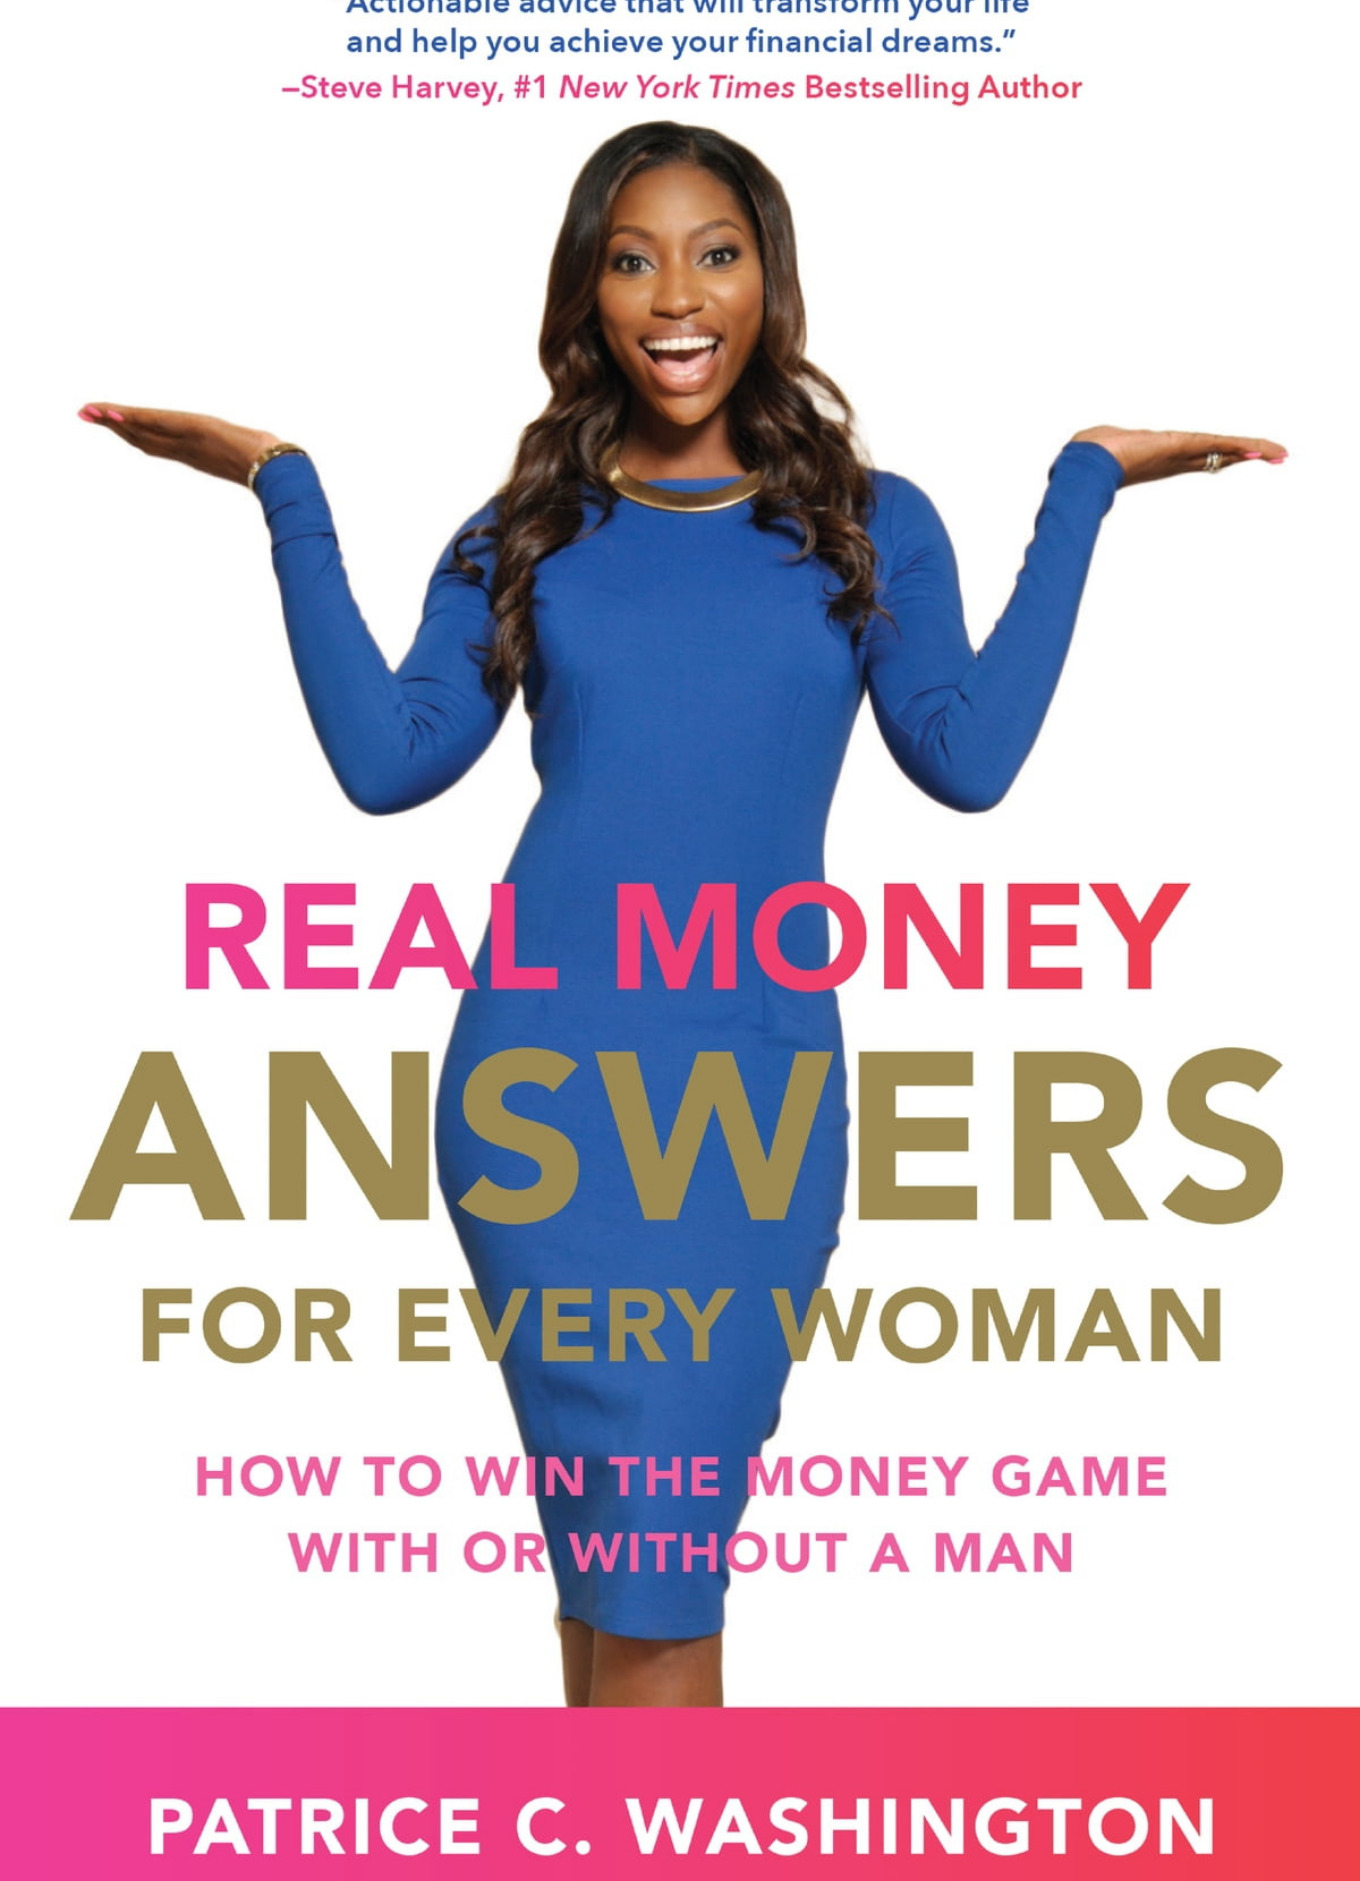 Patrice Washington poses on the cover of her book, Real Money Answers. She is wearing a blue skintight dress and her arms are outstretched. 